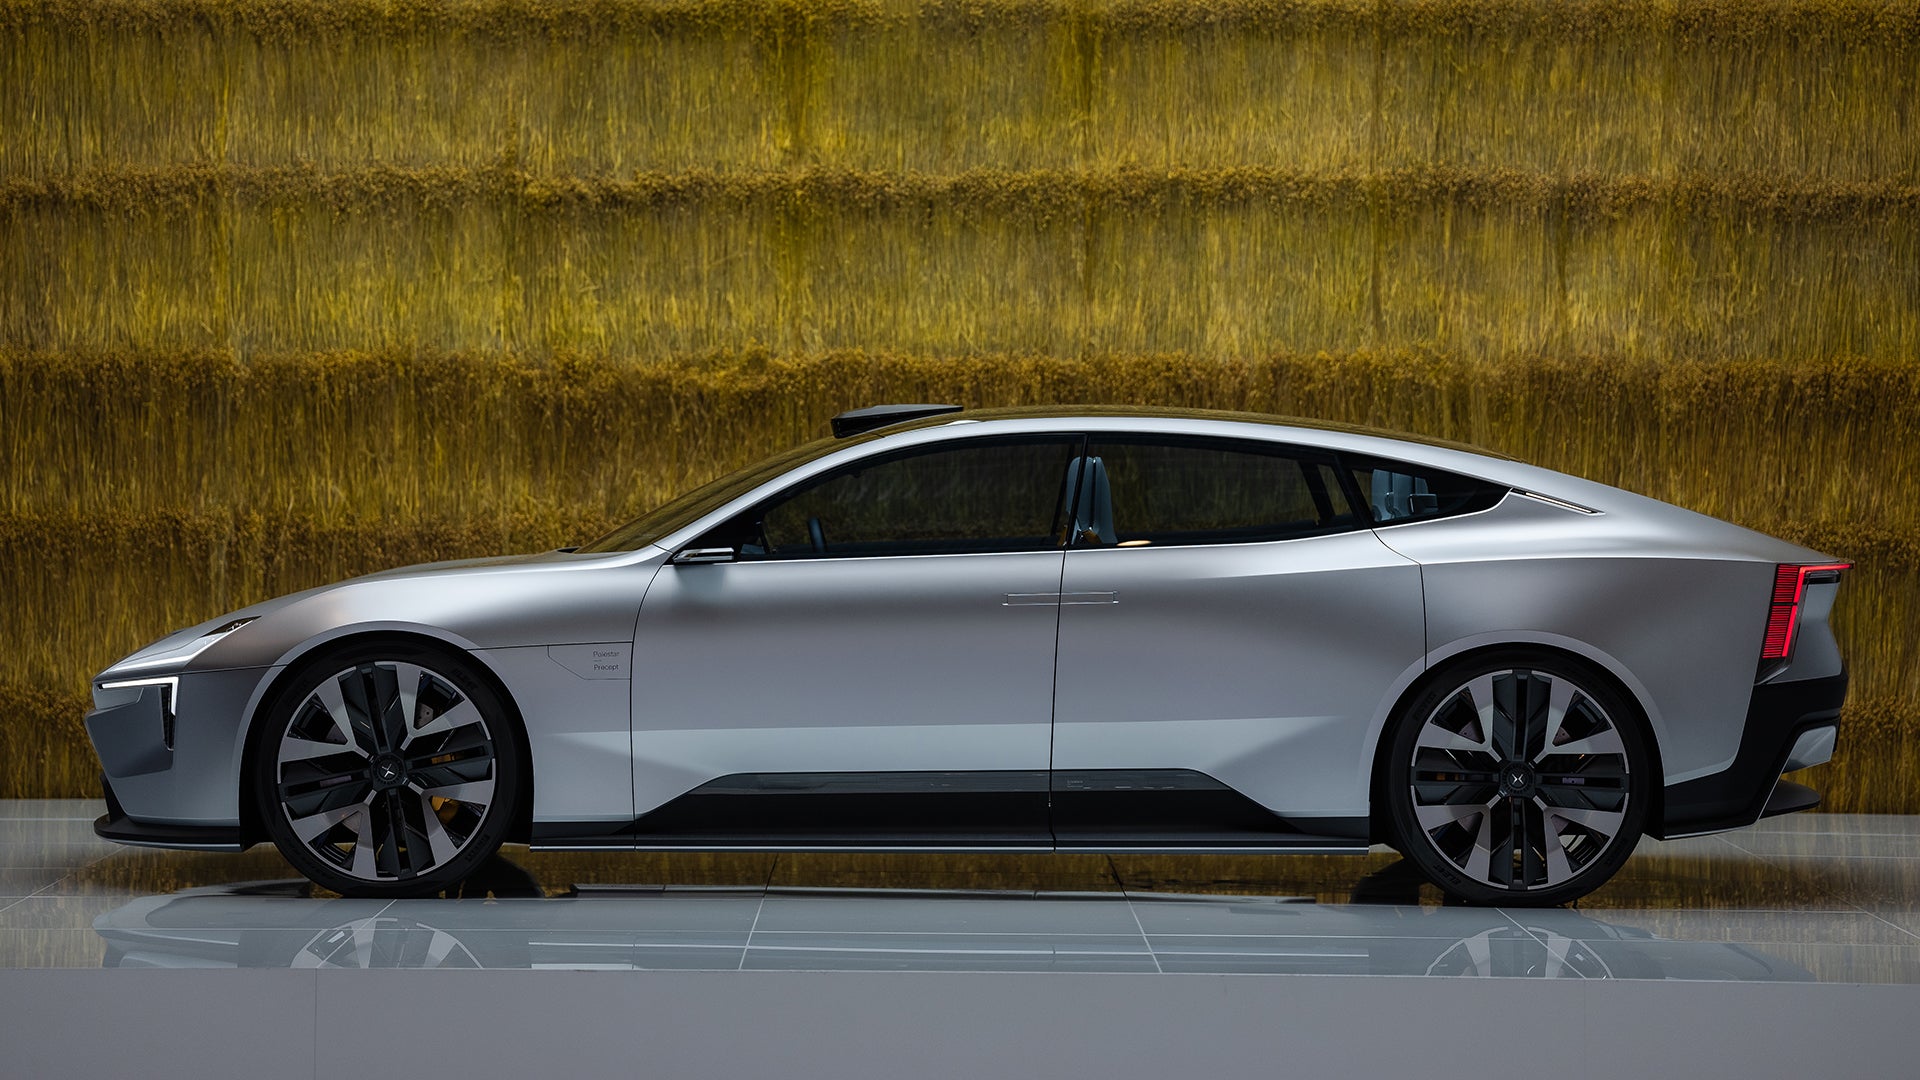 Polestar Announces the Stunning Precept EV Concept Is Going Into Production